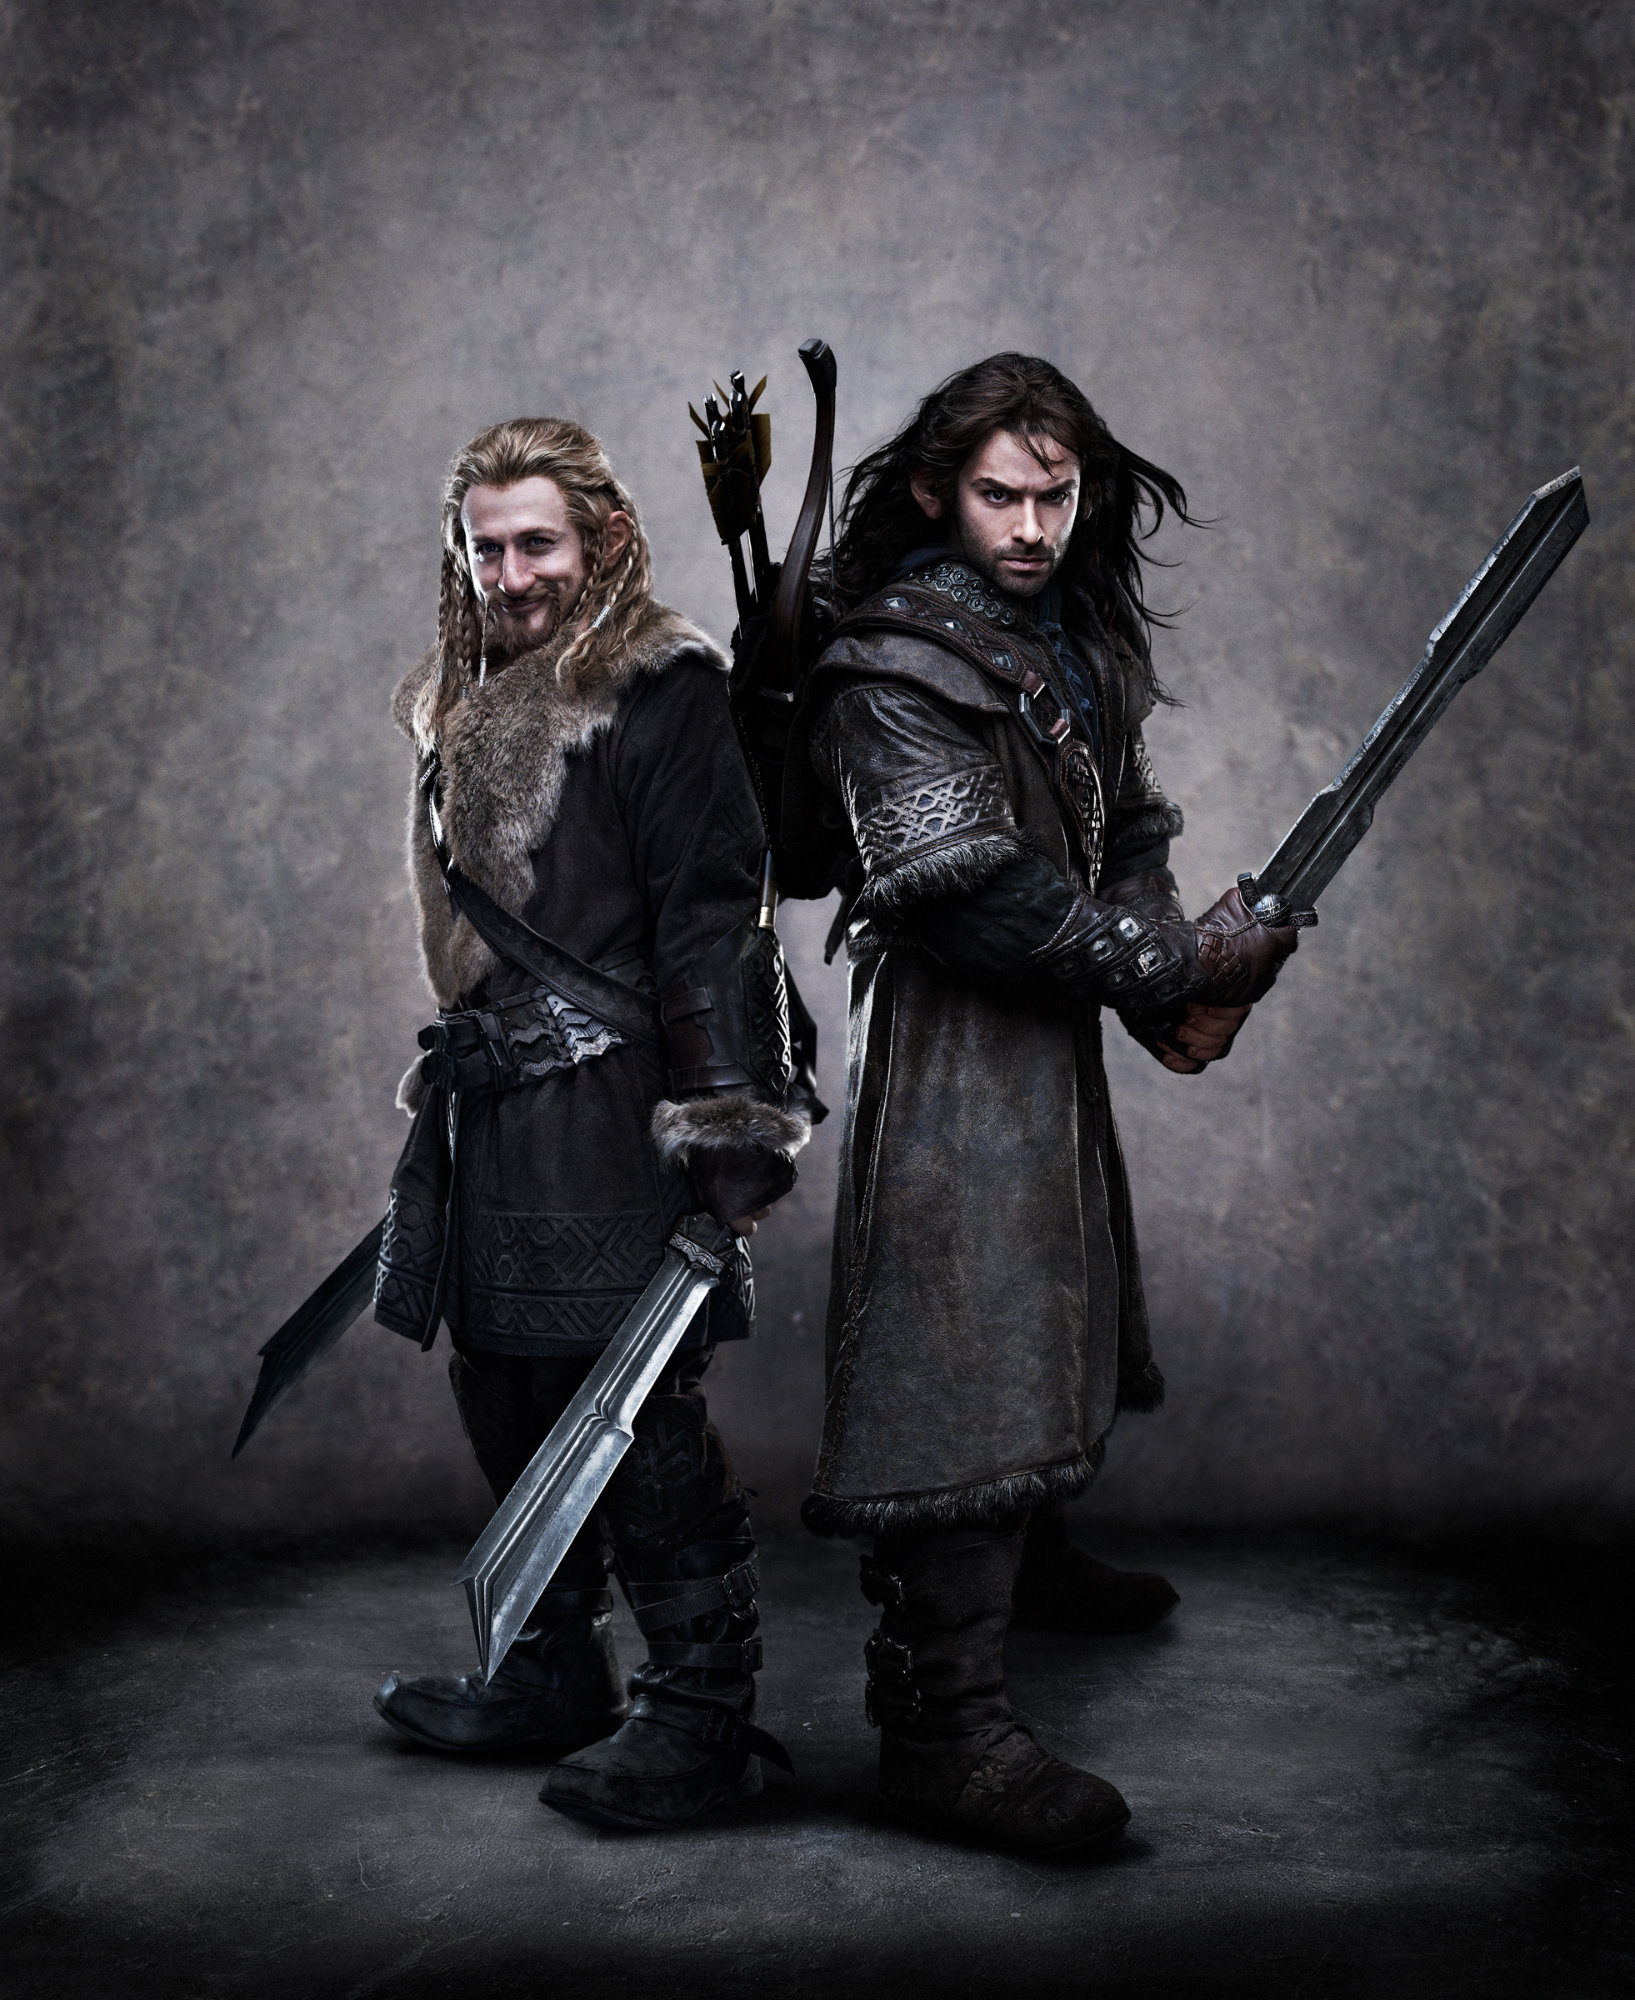 Dean O'Gorman stars as Fili and Aidan Turner stars as Kili in Warner Bros. Pictures' The Hobbit: An Unexpected Journey (2012)